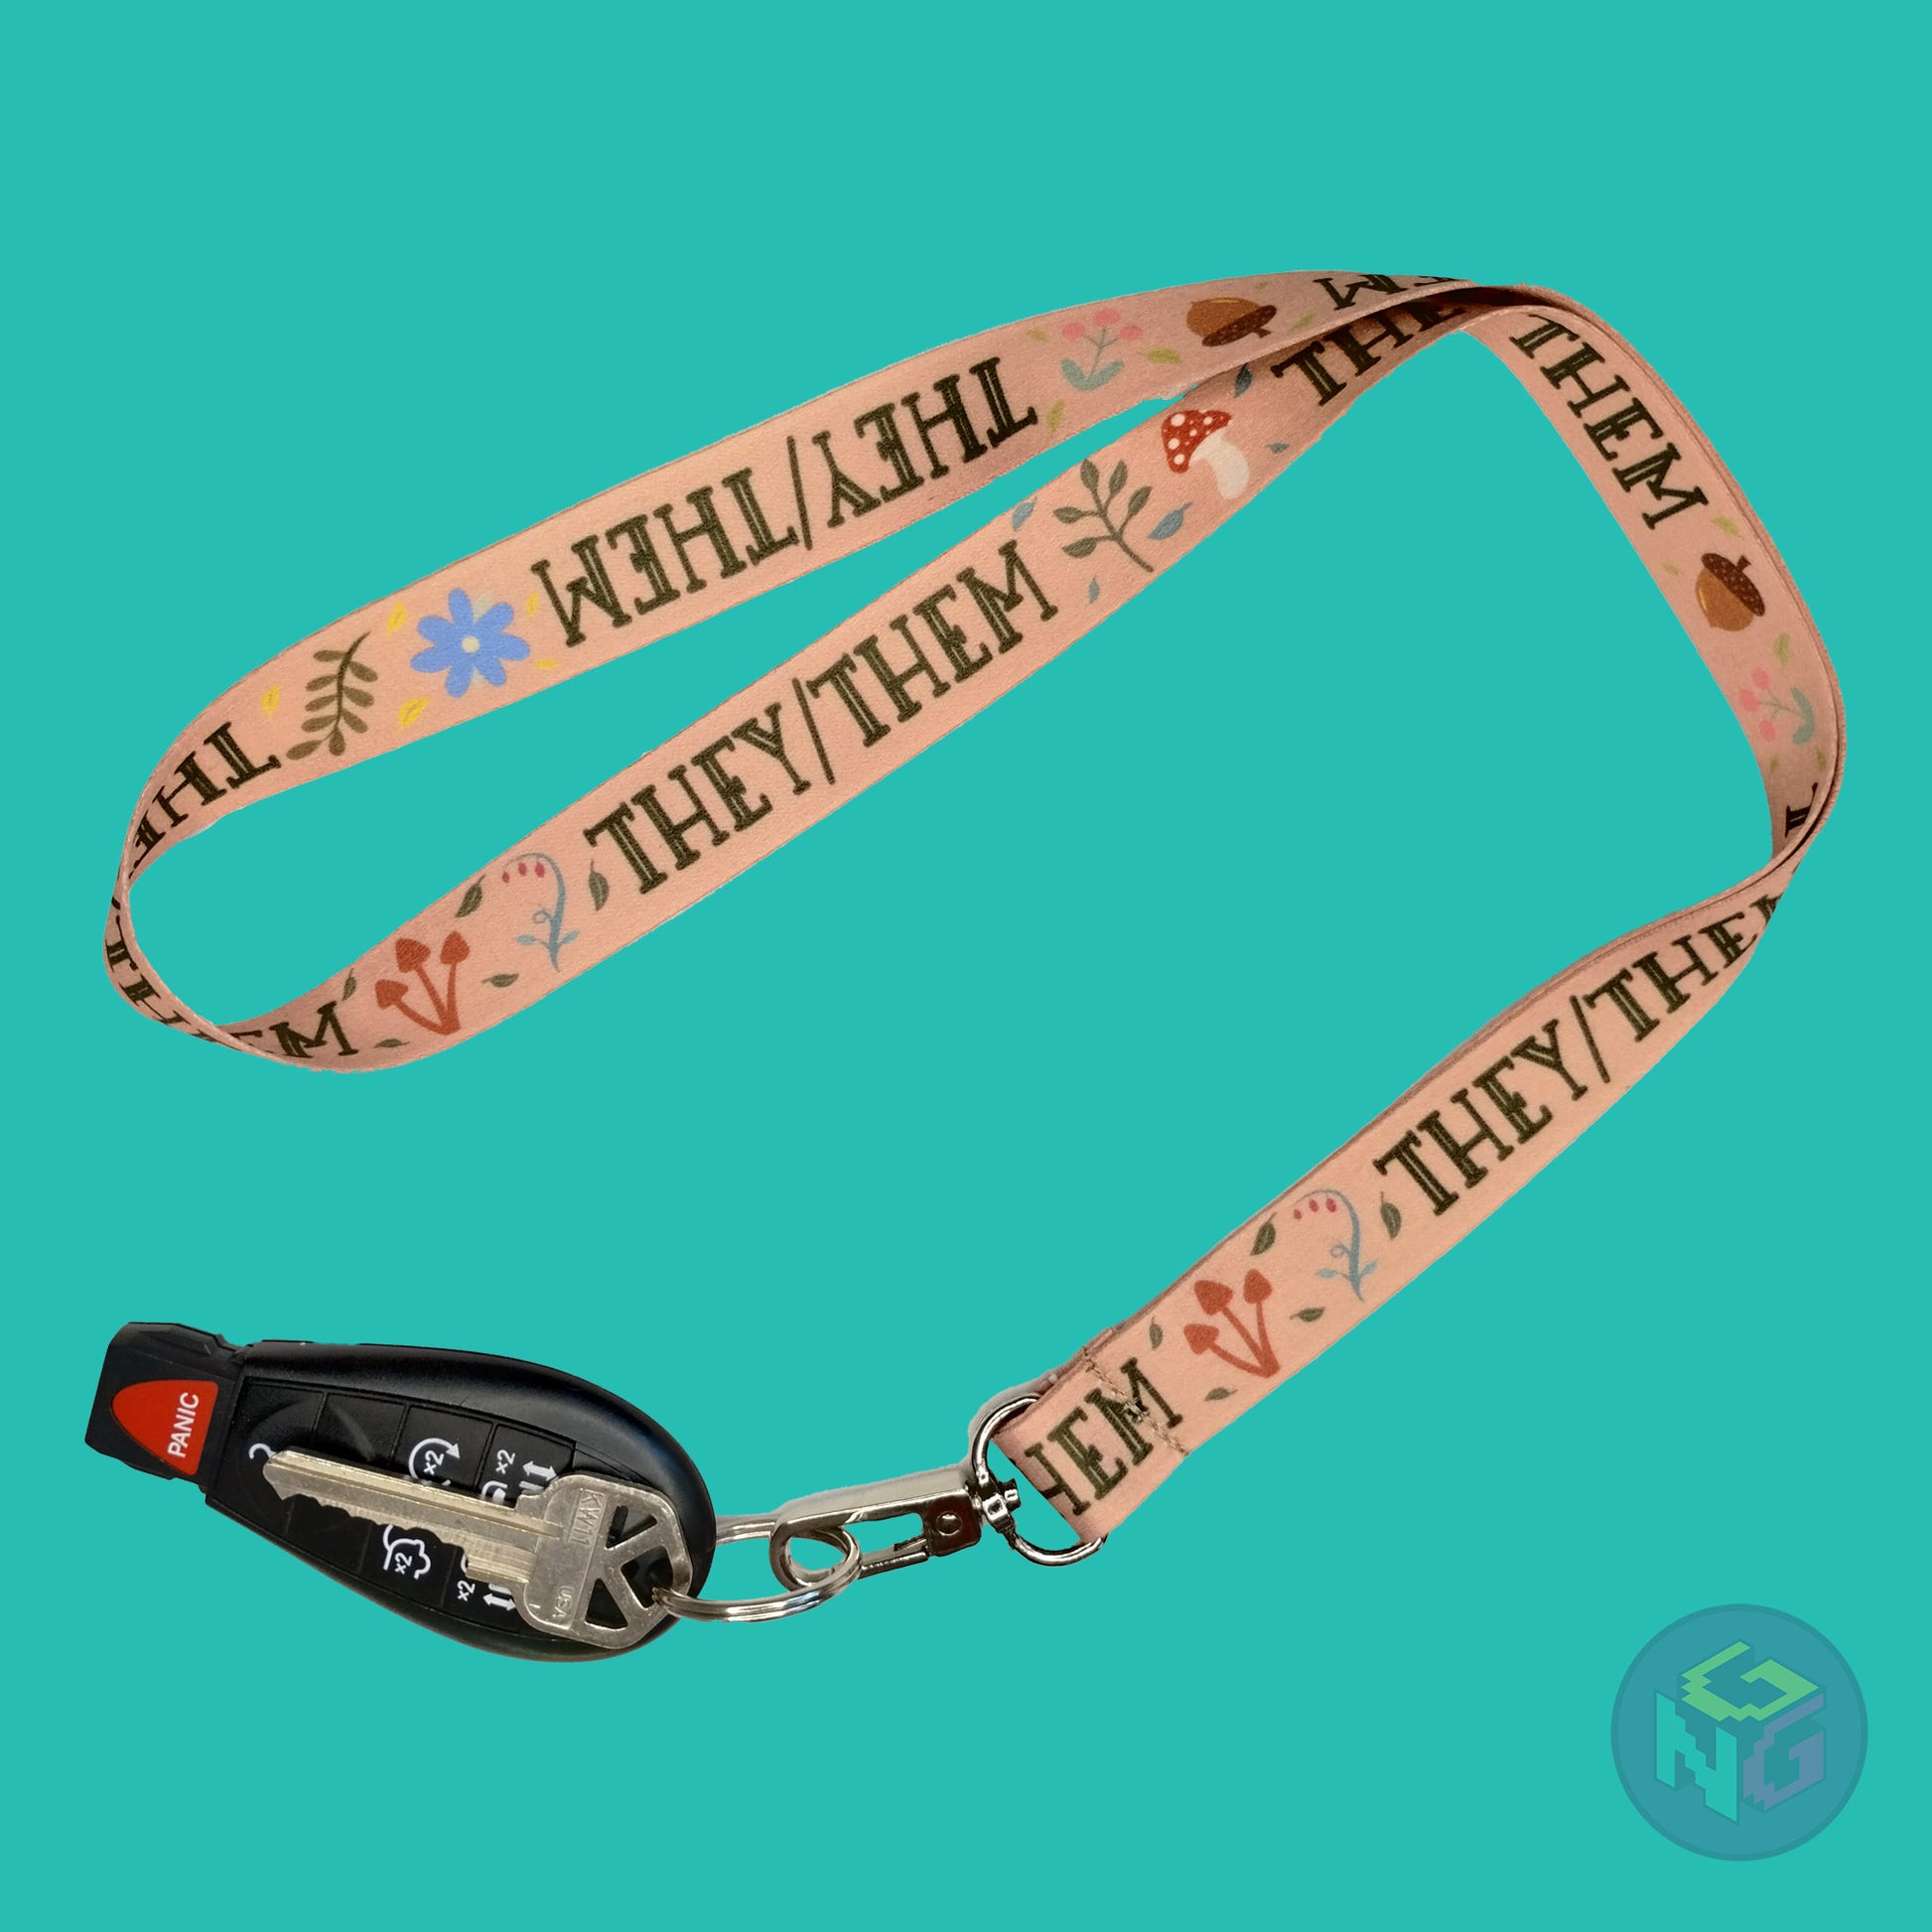 tan they them pronoun lanyard showing the green text, mushrooms, leaves, and flower details with a key fob clipped to the end of the lanyard